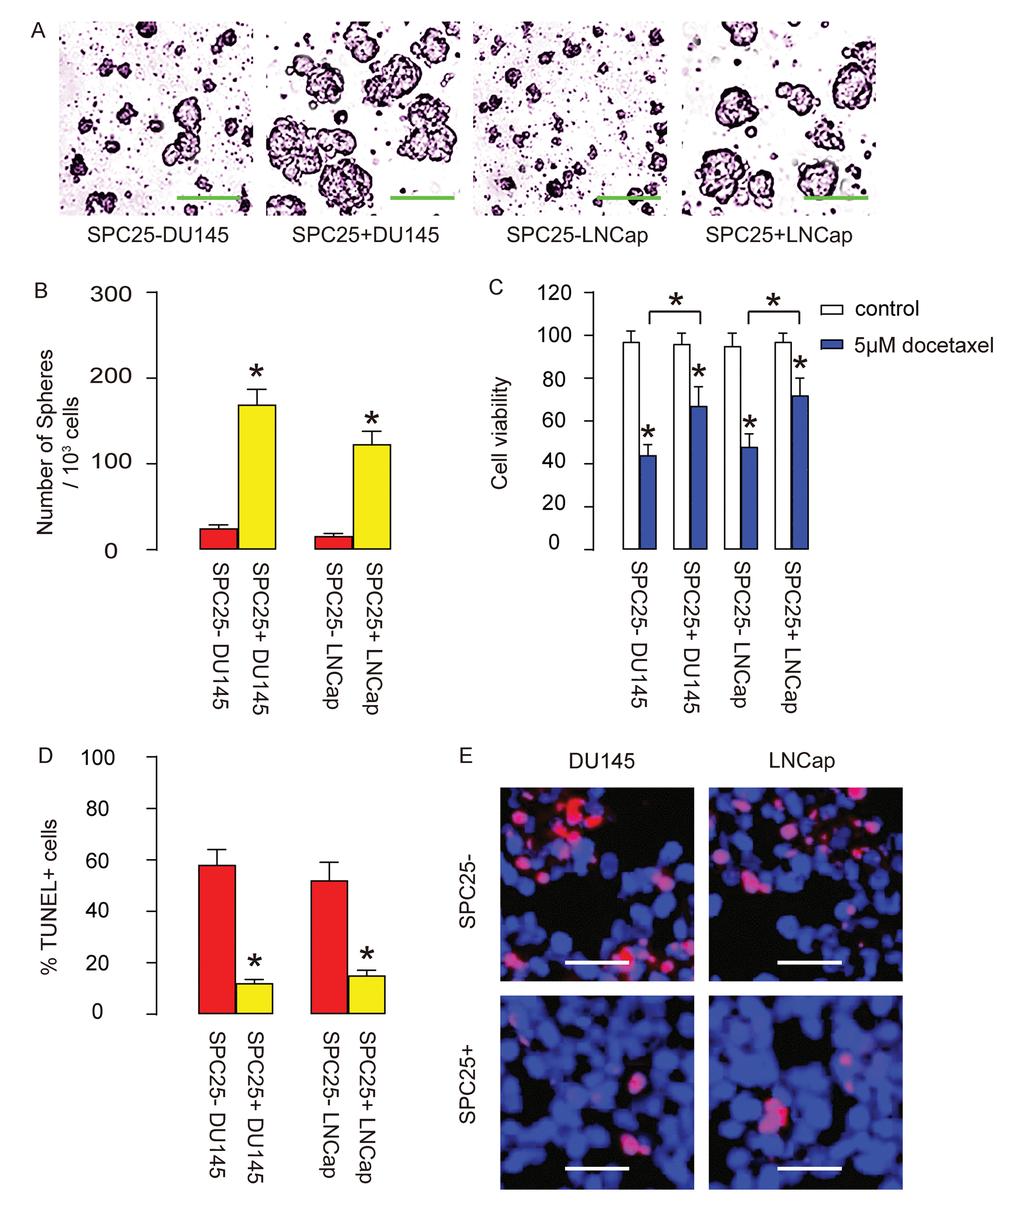 SPC25+ PrC cells are enriched with CSCs. (A-B) The tumor sphere formation by SPC25- and SPC25+ cells from two cell lines, shown by representative images (A) and by quantification (B). (C-E) Docetaxel was applied to SPC25- and SPC25+ cells from both cell lines. (C) Cell viability by CCK-8 assay. (D-E) Cell apoptosis by TUNEL assay, shown by quantification (D), and by representative images (E). *pE were 20 µm.